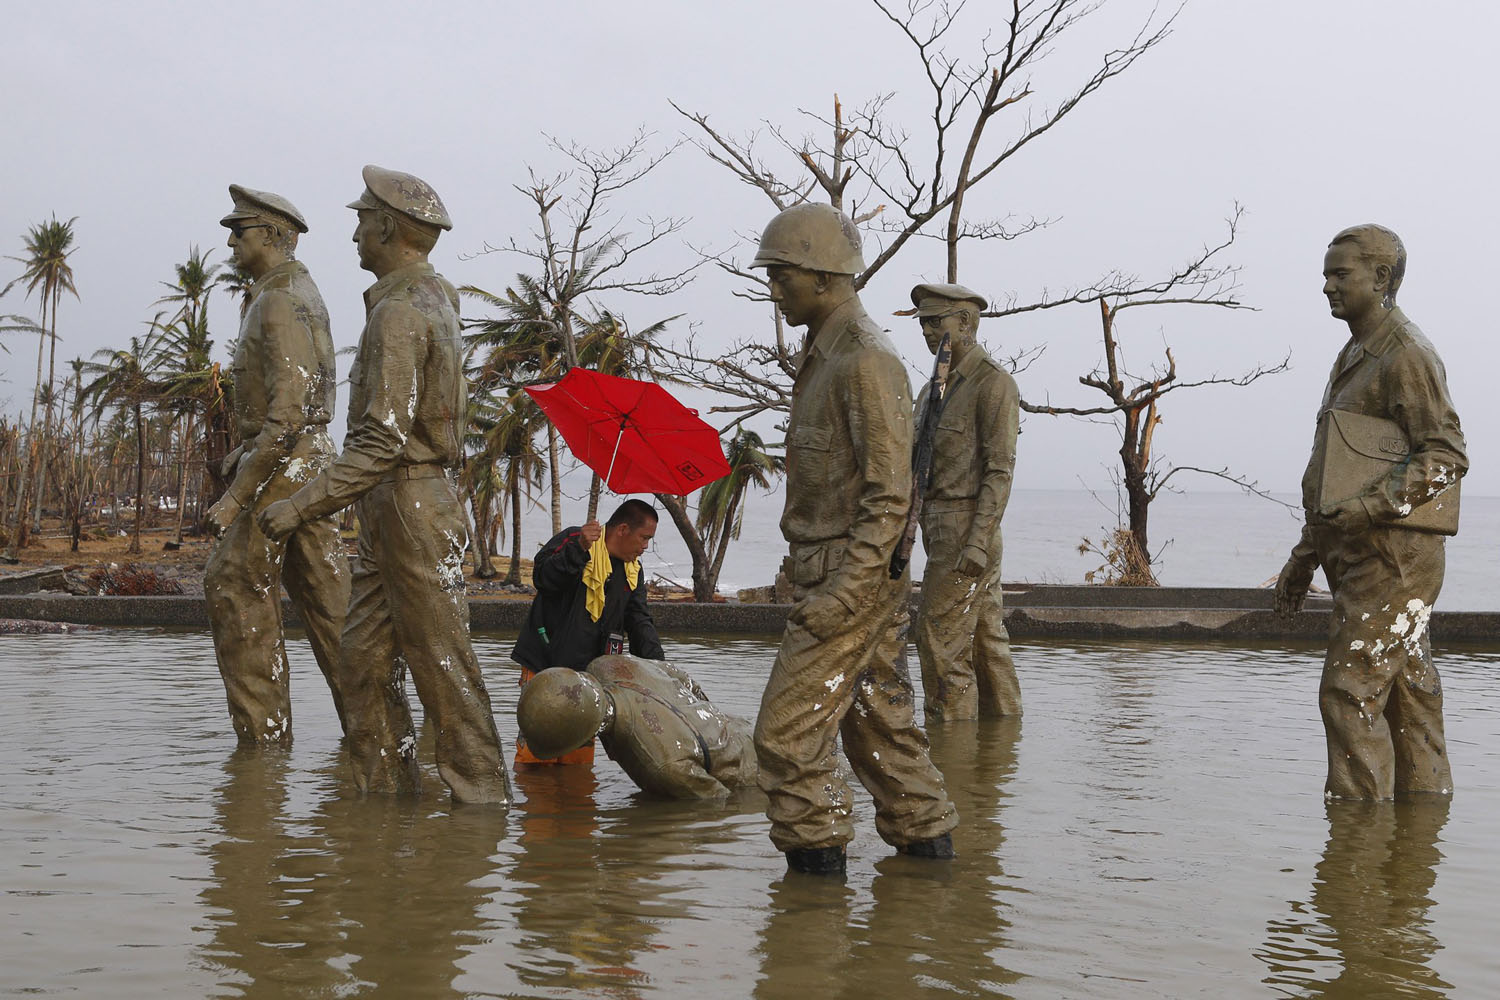 A resident inspects one of the statues at the U.S. General Douglas MacArthur shrine that fell at the height of super typhoon Haiyan last Friday in Palo, Leyte province